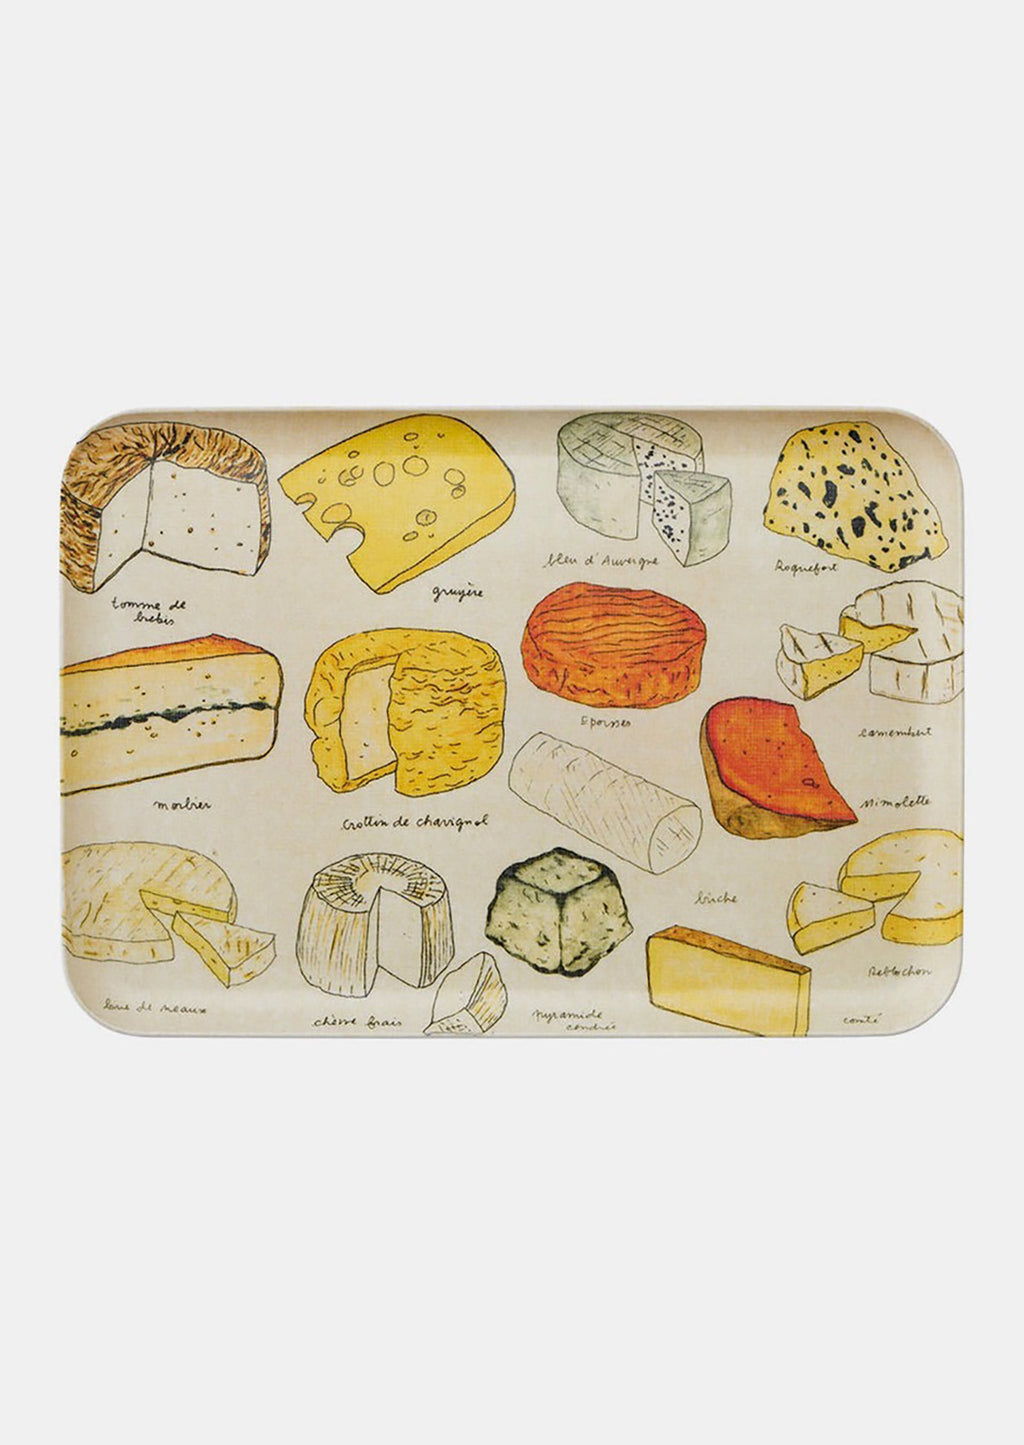 1: A serving tray with cheese print.